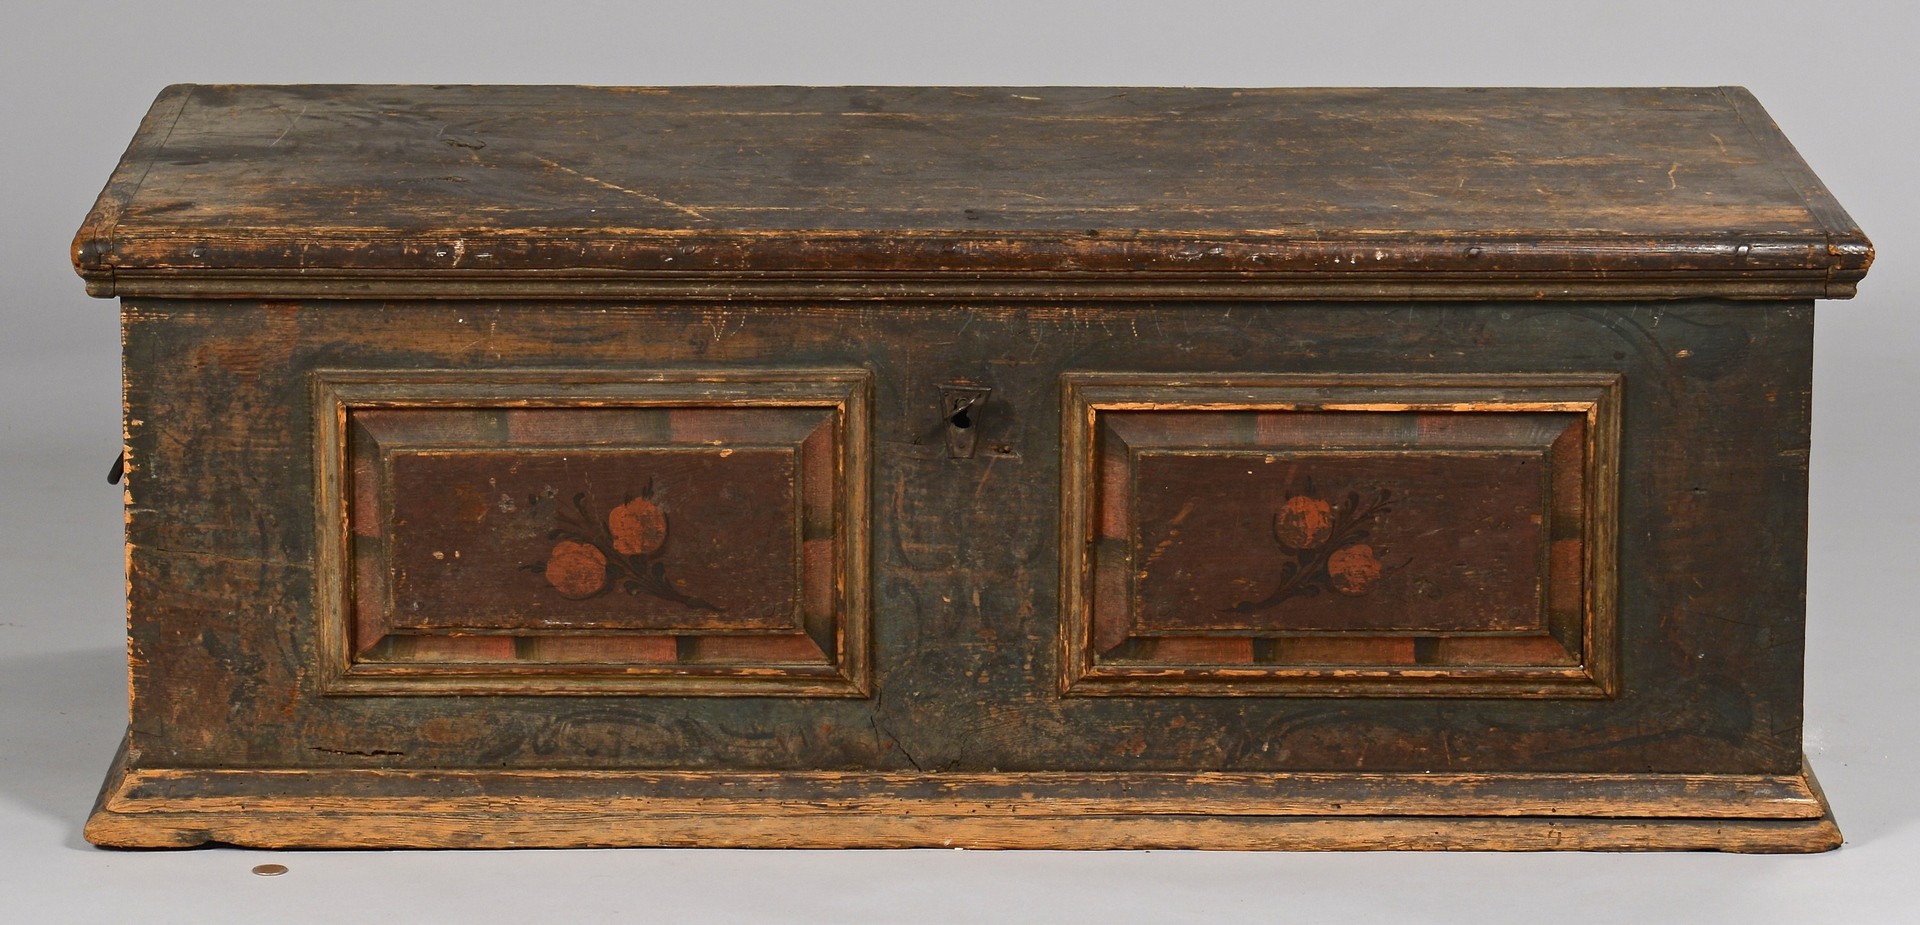 Lot 733: Blanket Chest with Paint Decorated Panels